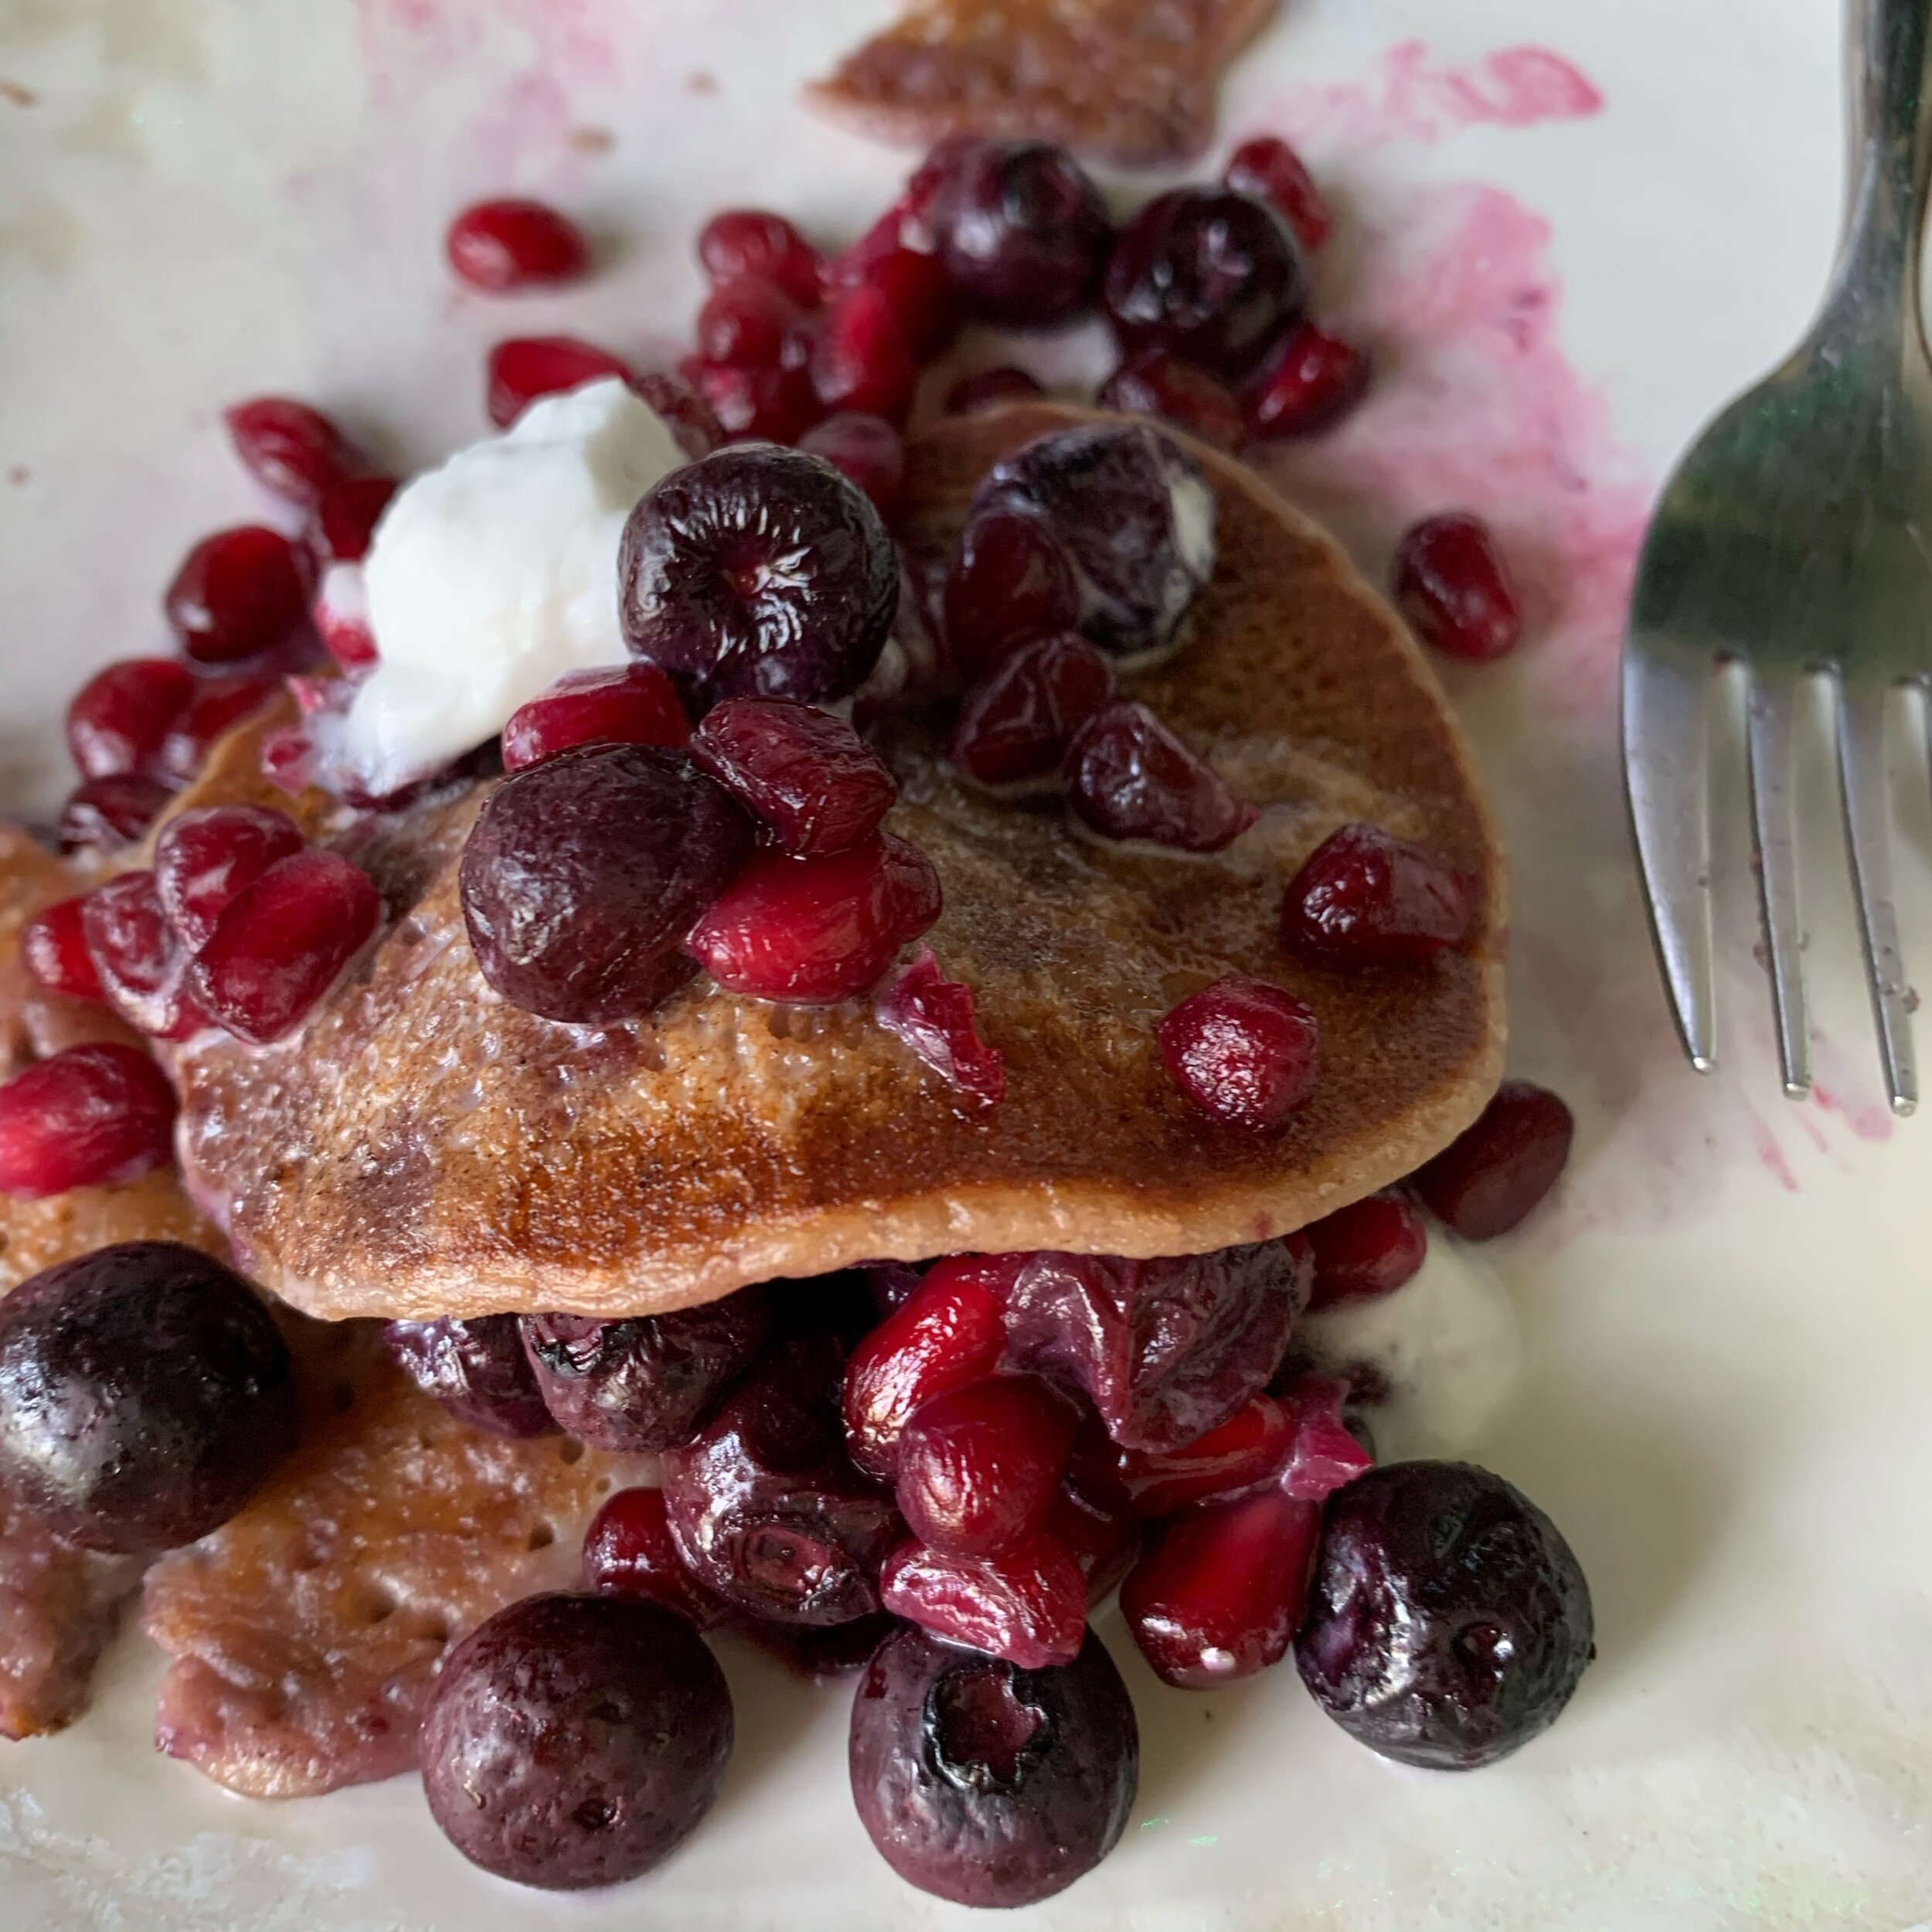 These pancakes have protein, nutrients sand healthy fat, perfect day starter